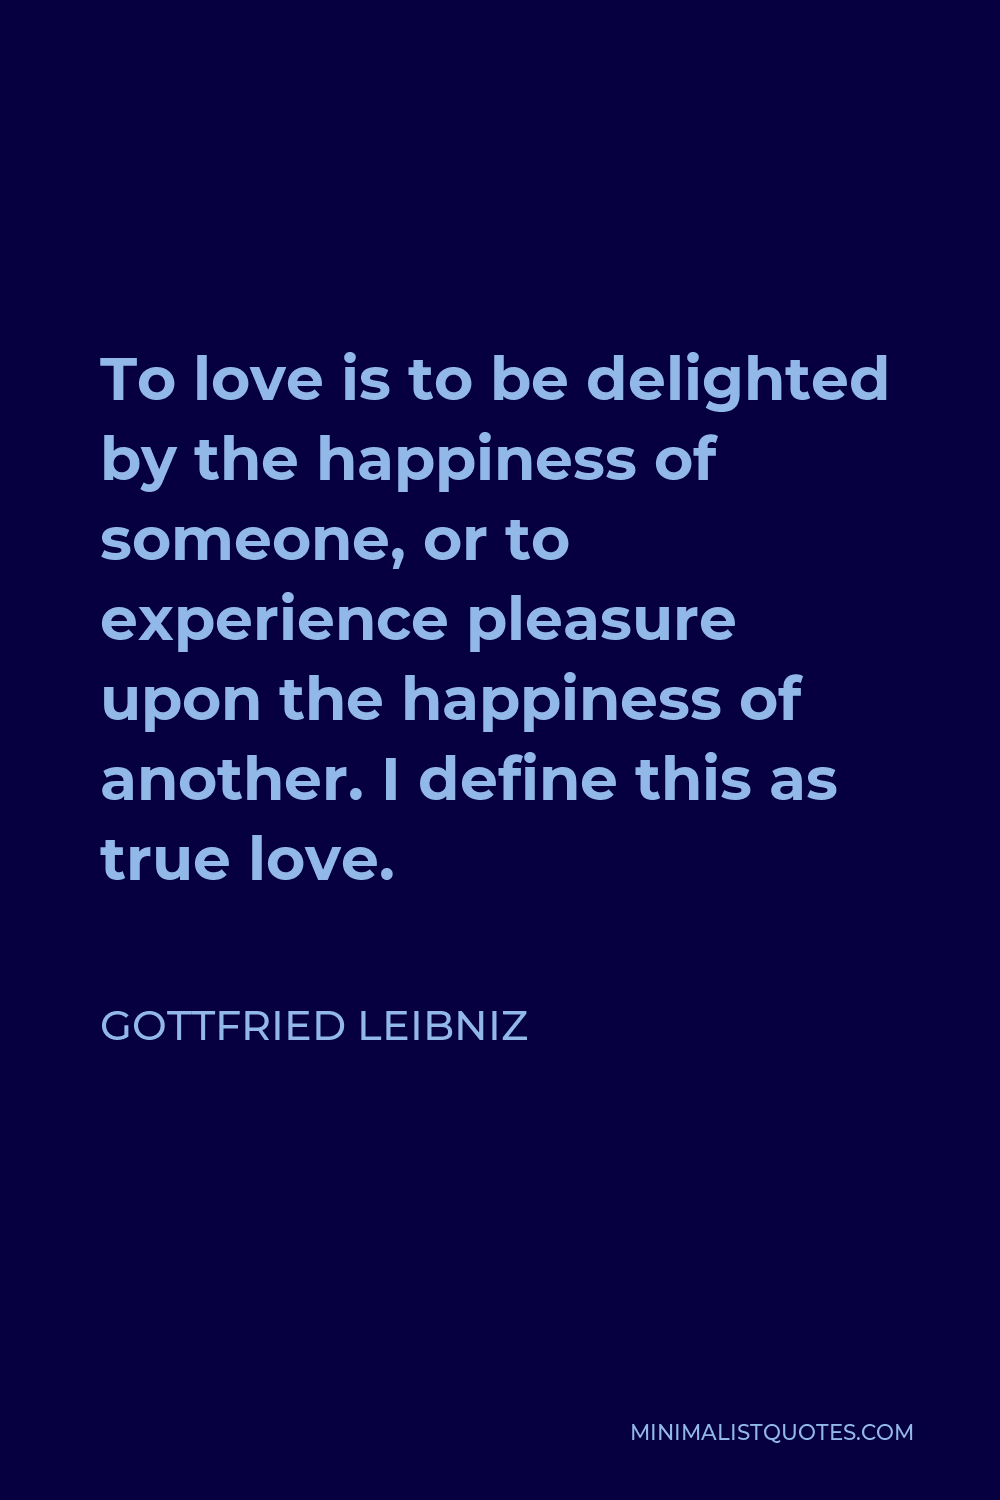 Gottfried Leibniz Quote: To love is to be delighted by the happiness of ...